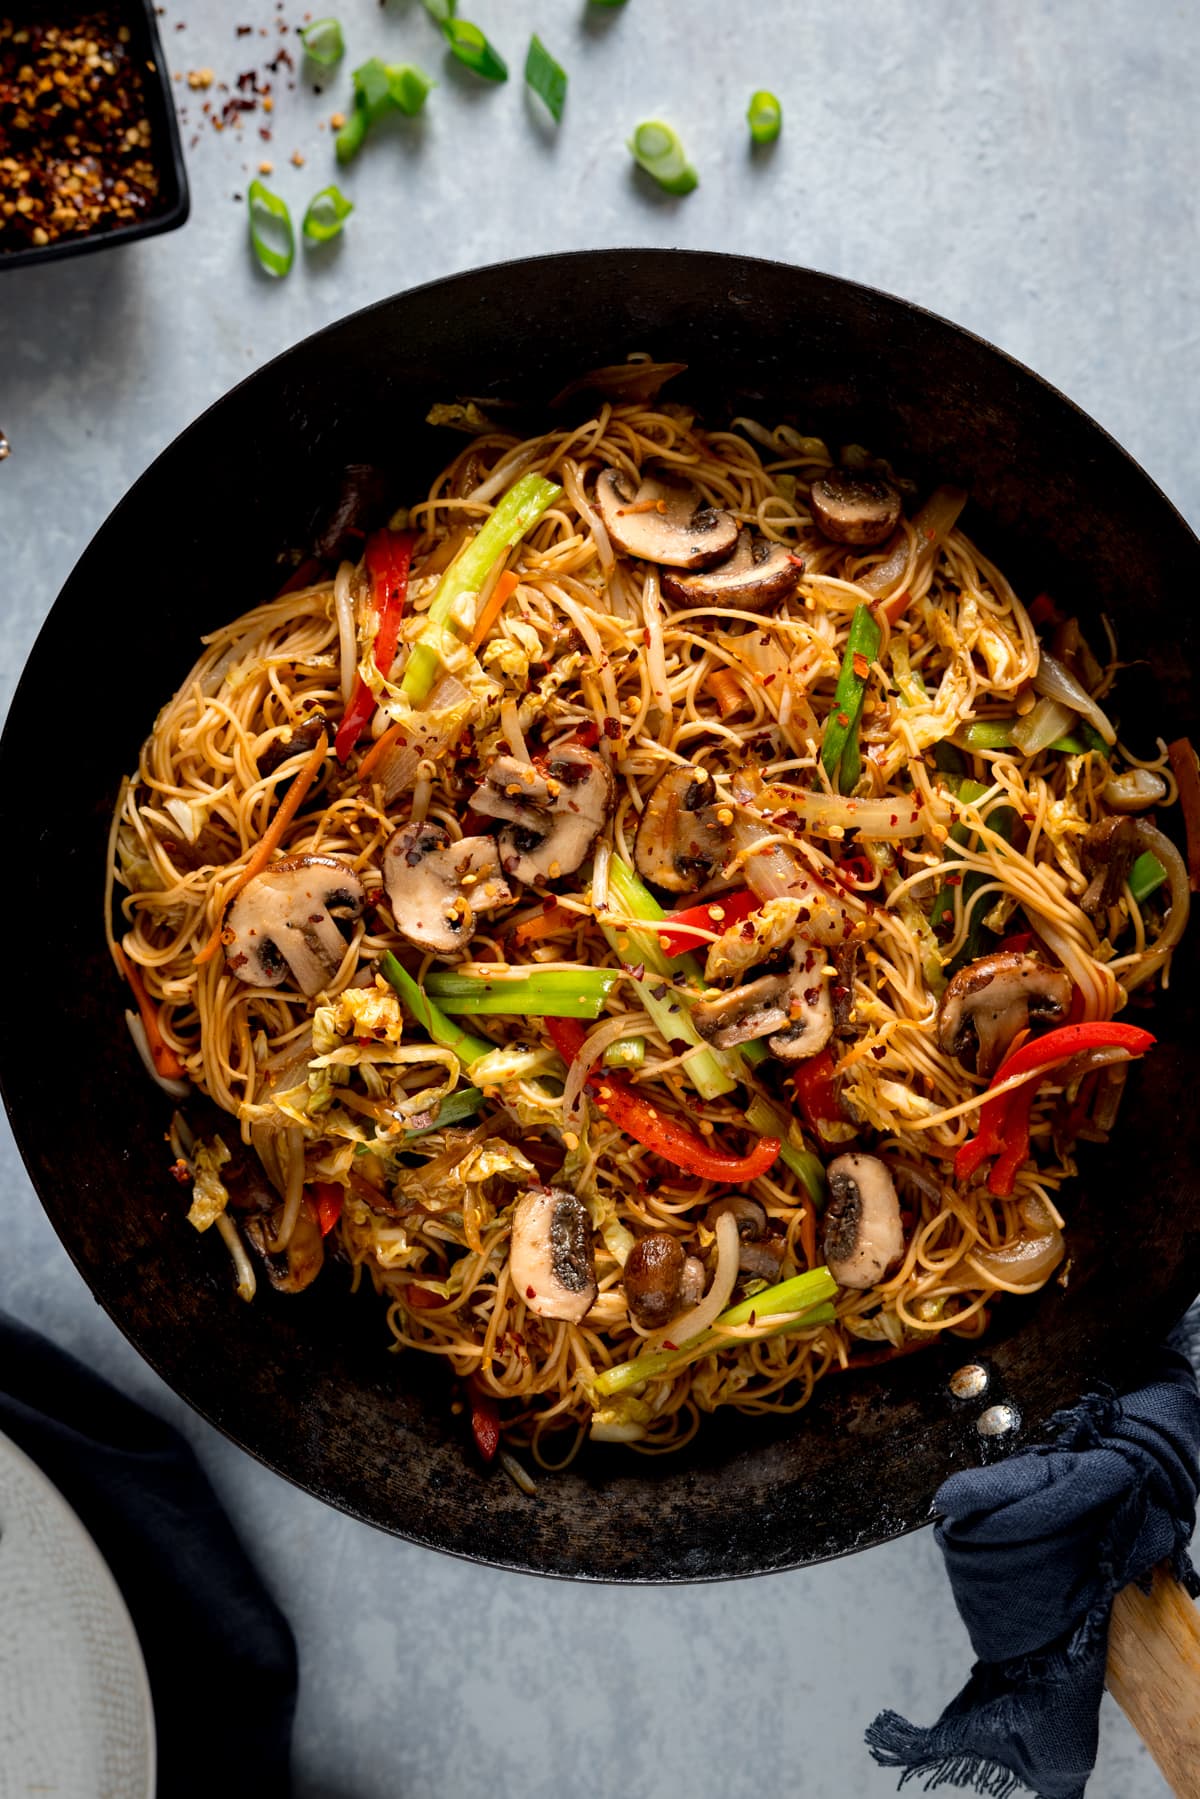 A tall overhead image of mushroom chow mein in a black wok on a grey surface. In the background is a small dish of chilli flakes on the top left of the frame. There are chopped spring onions scattered around. On the bottom left of the frame, there is a grey bowl.